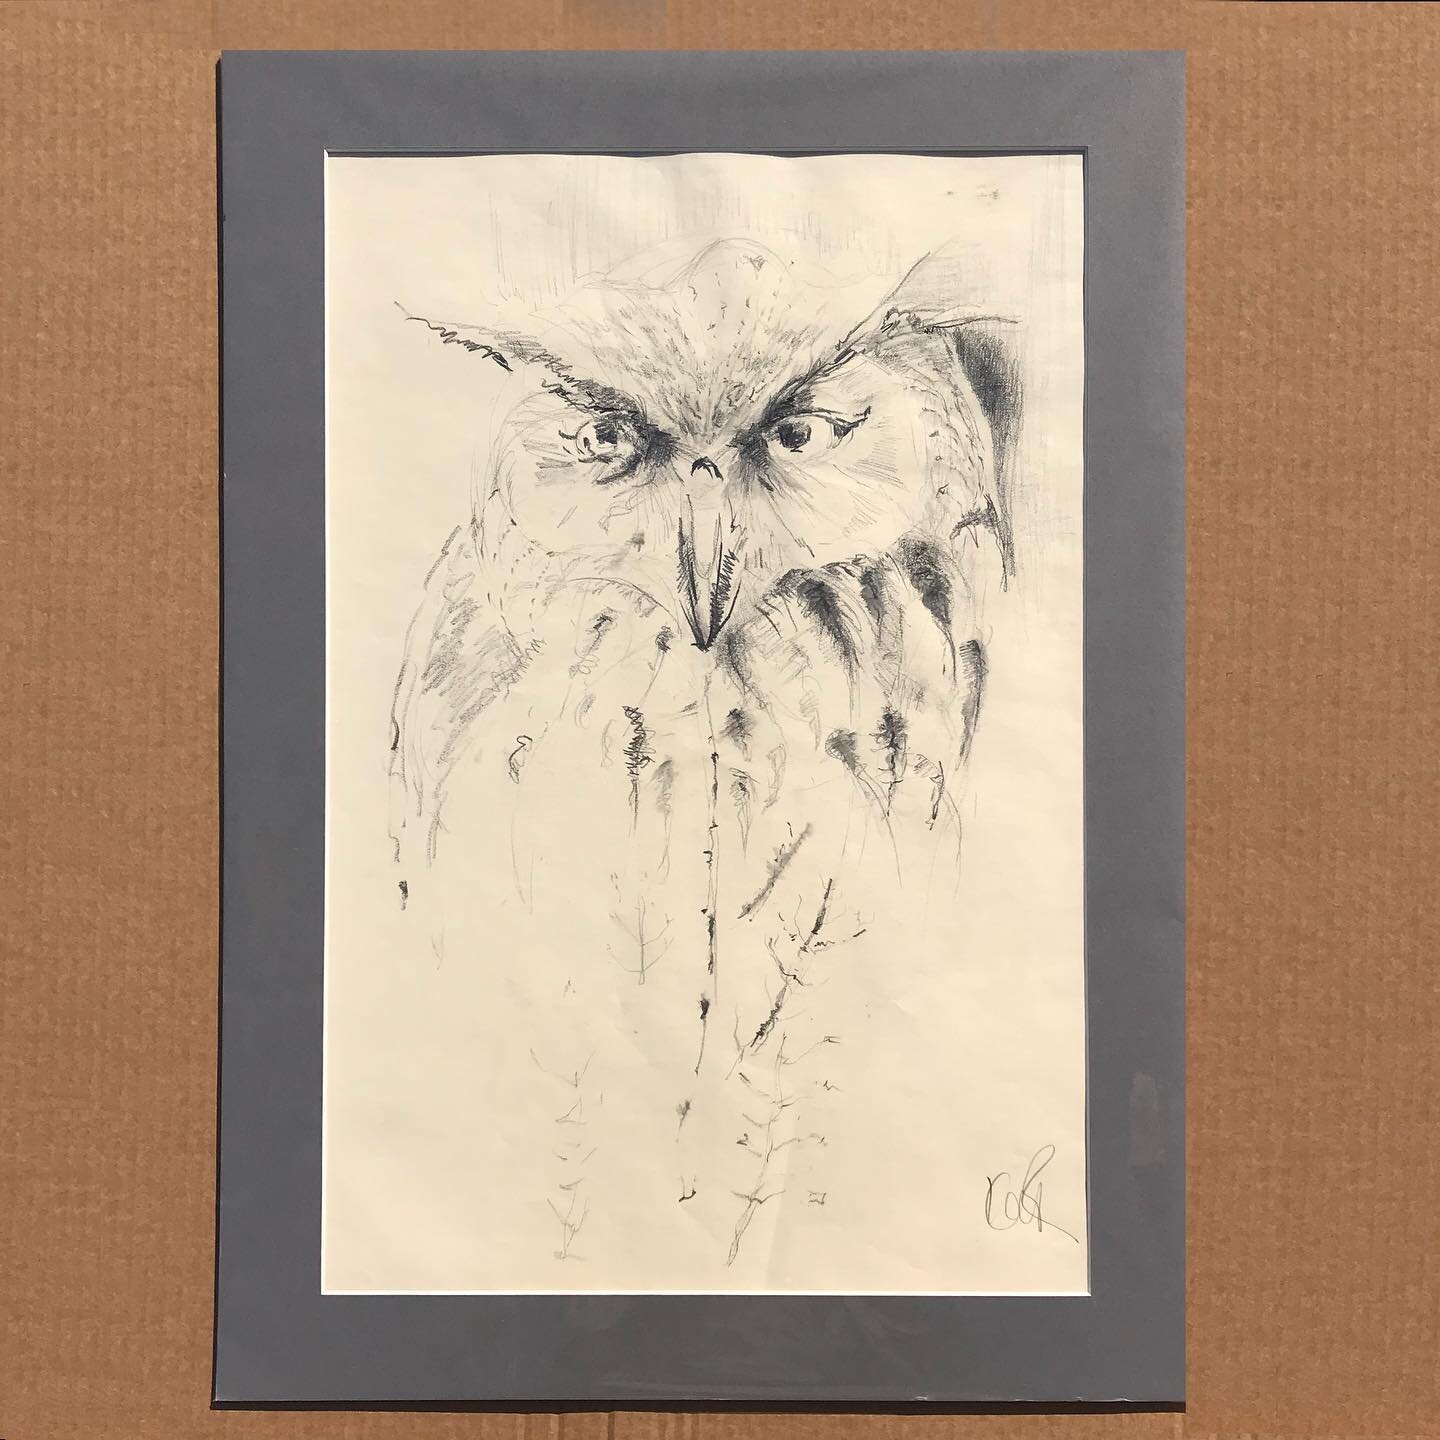 Today&rsquo;s sketch for #artistsupportpledge! Number 8 - Eagle owl
&pound;150 (+p&amp;p)
Original sketch
Pencil drawing 
Mounted
64cm x 46cm
DM me if interested!

#artistsupportpledge #sketchoftheday #orginalart #originalartwork #owl #owlsketch #bri